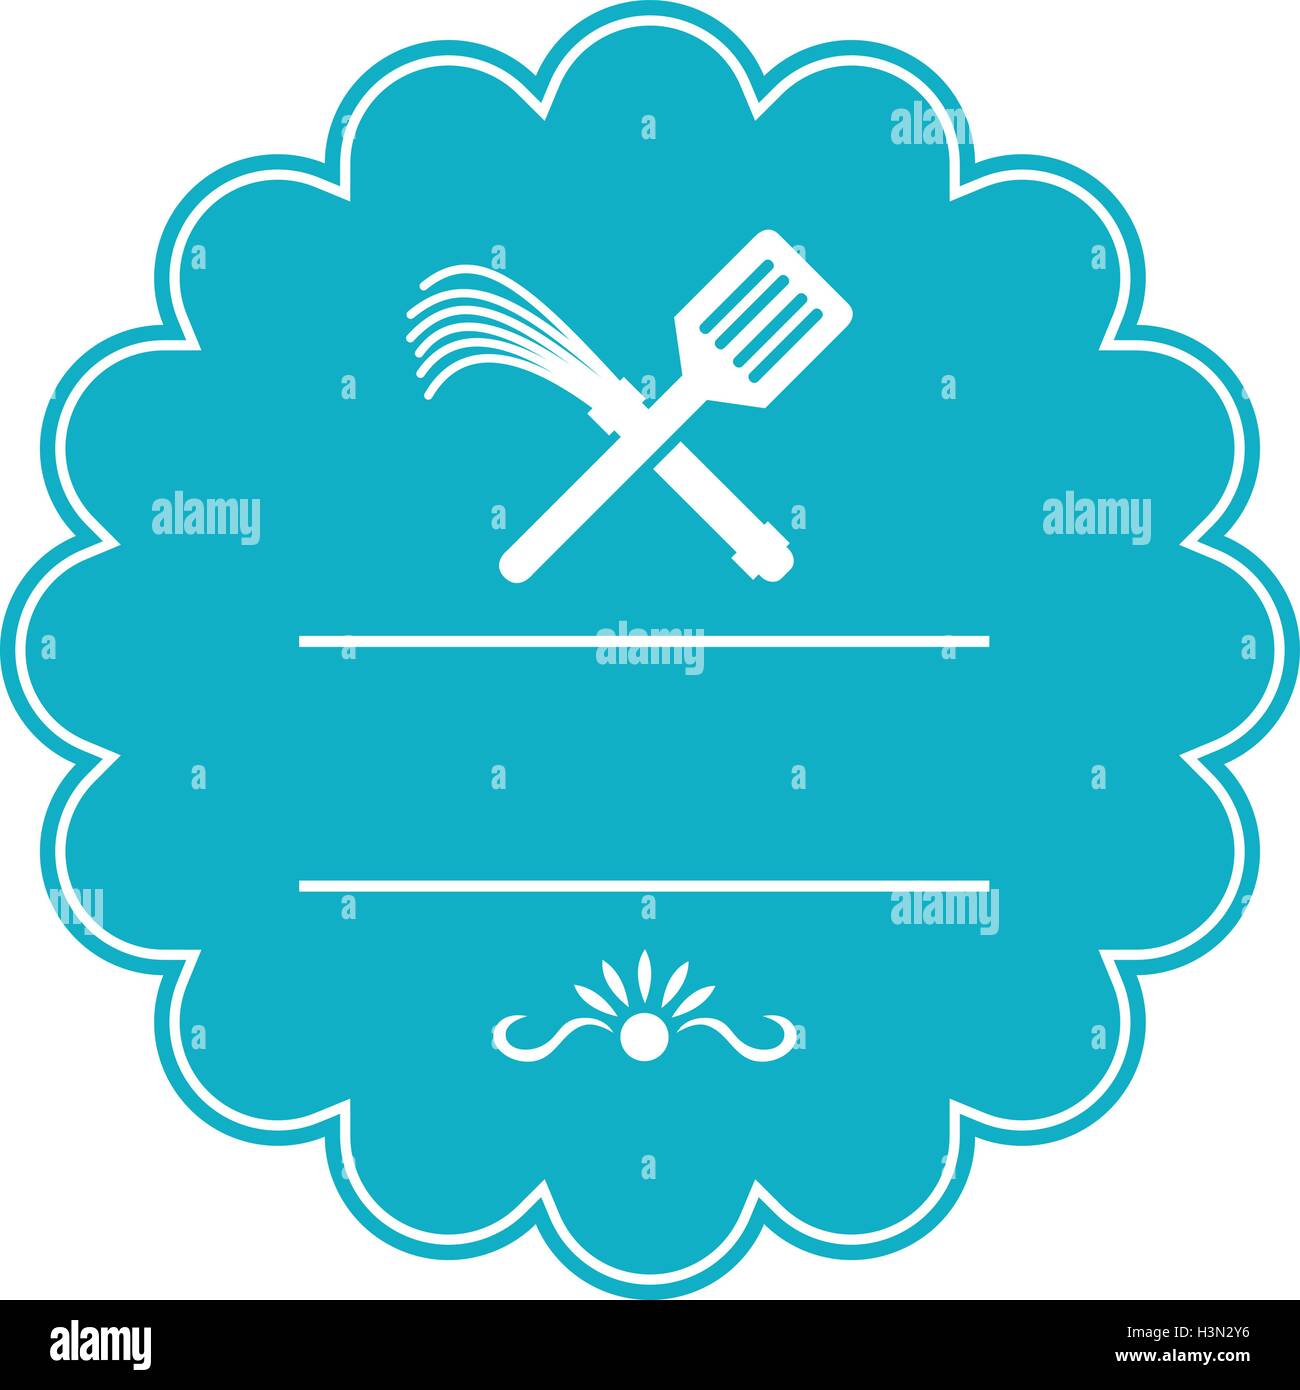 Illustration of a spatula crossed with a flogger whip set inside rosette done in retro style. Stock Vector